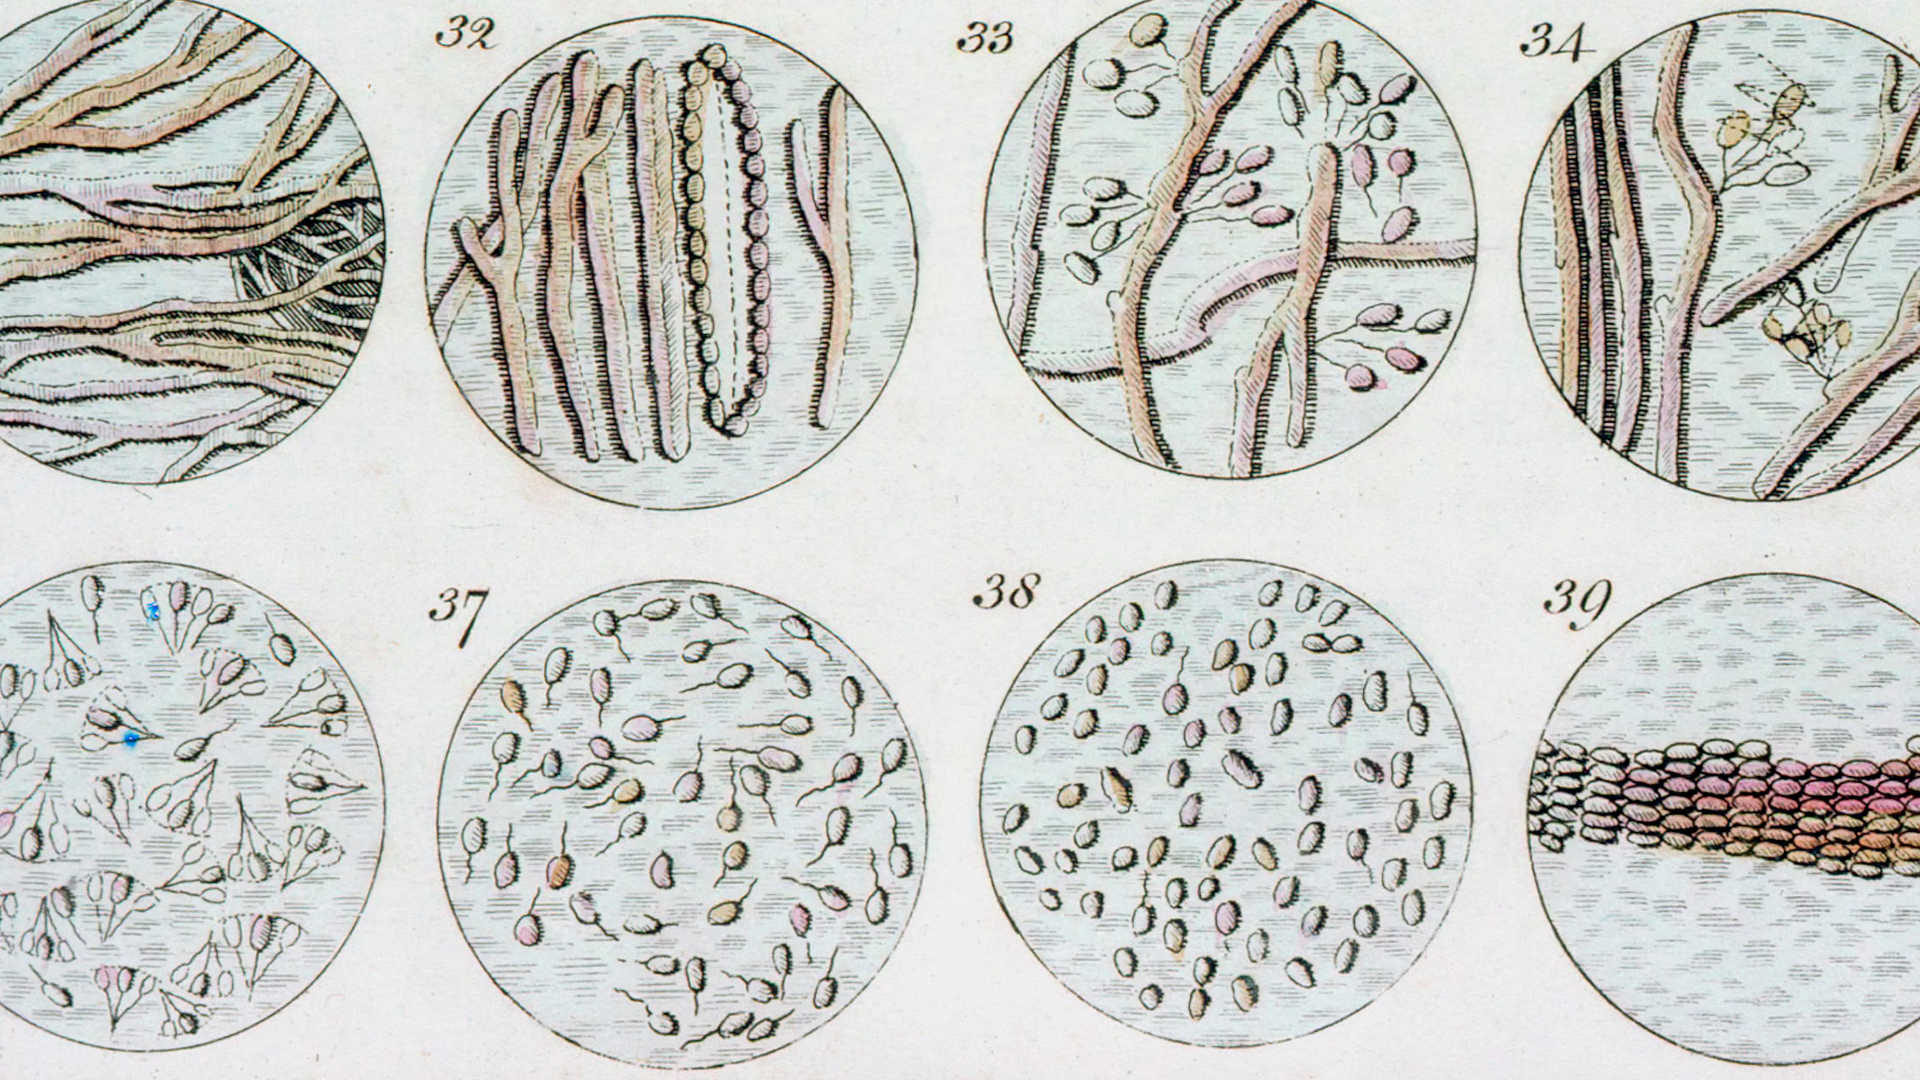 An engraving of "animalcules" observed through a microscope by Antonie van Leeuwenhoek, 1795. The samples shown are human spermatazoa.